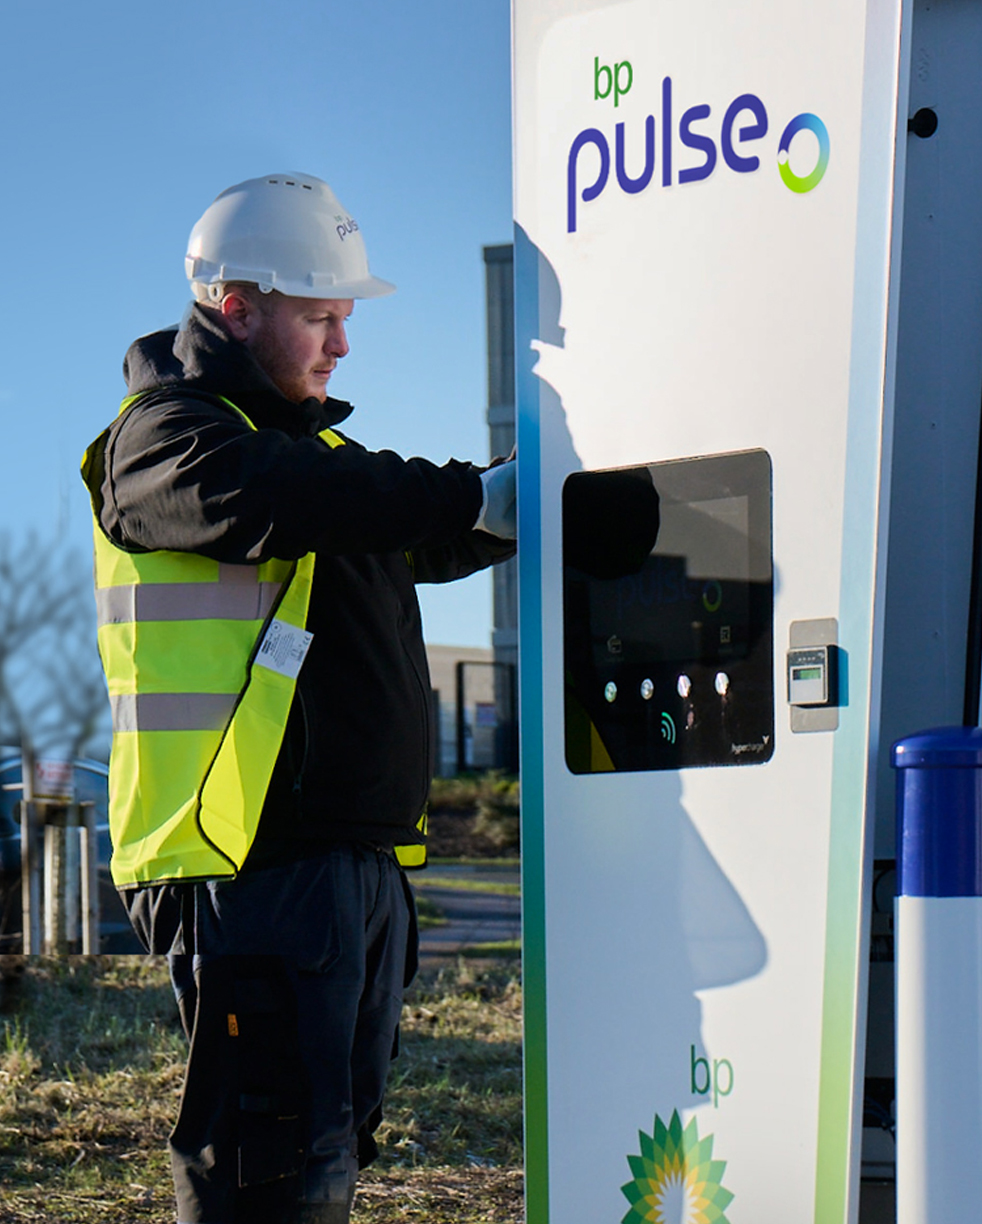 Installing an EV charger at the Kettering hub